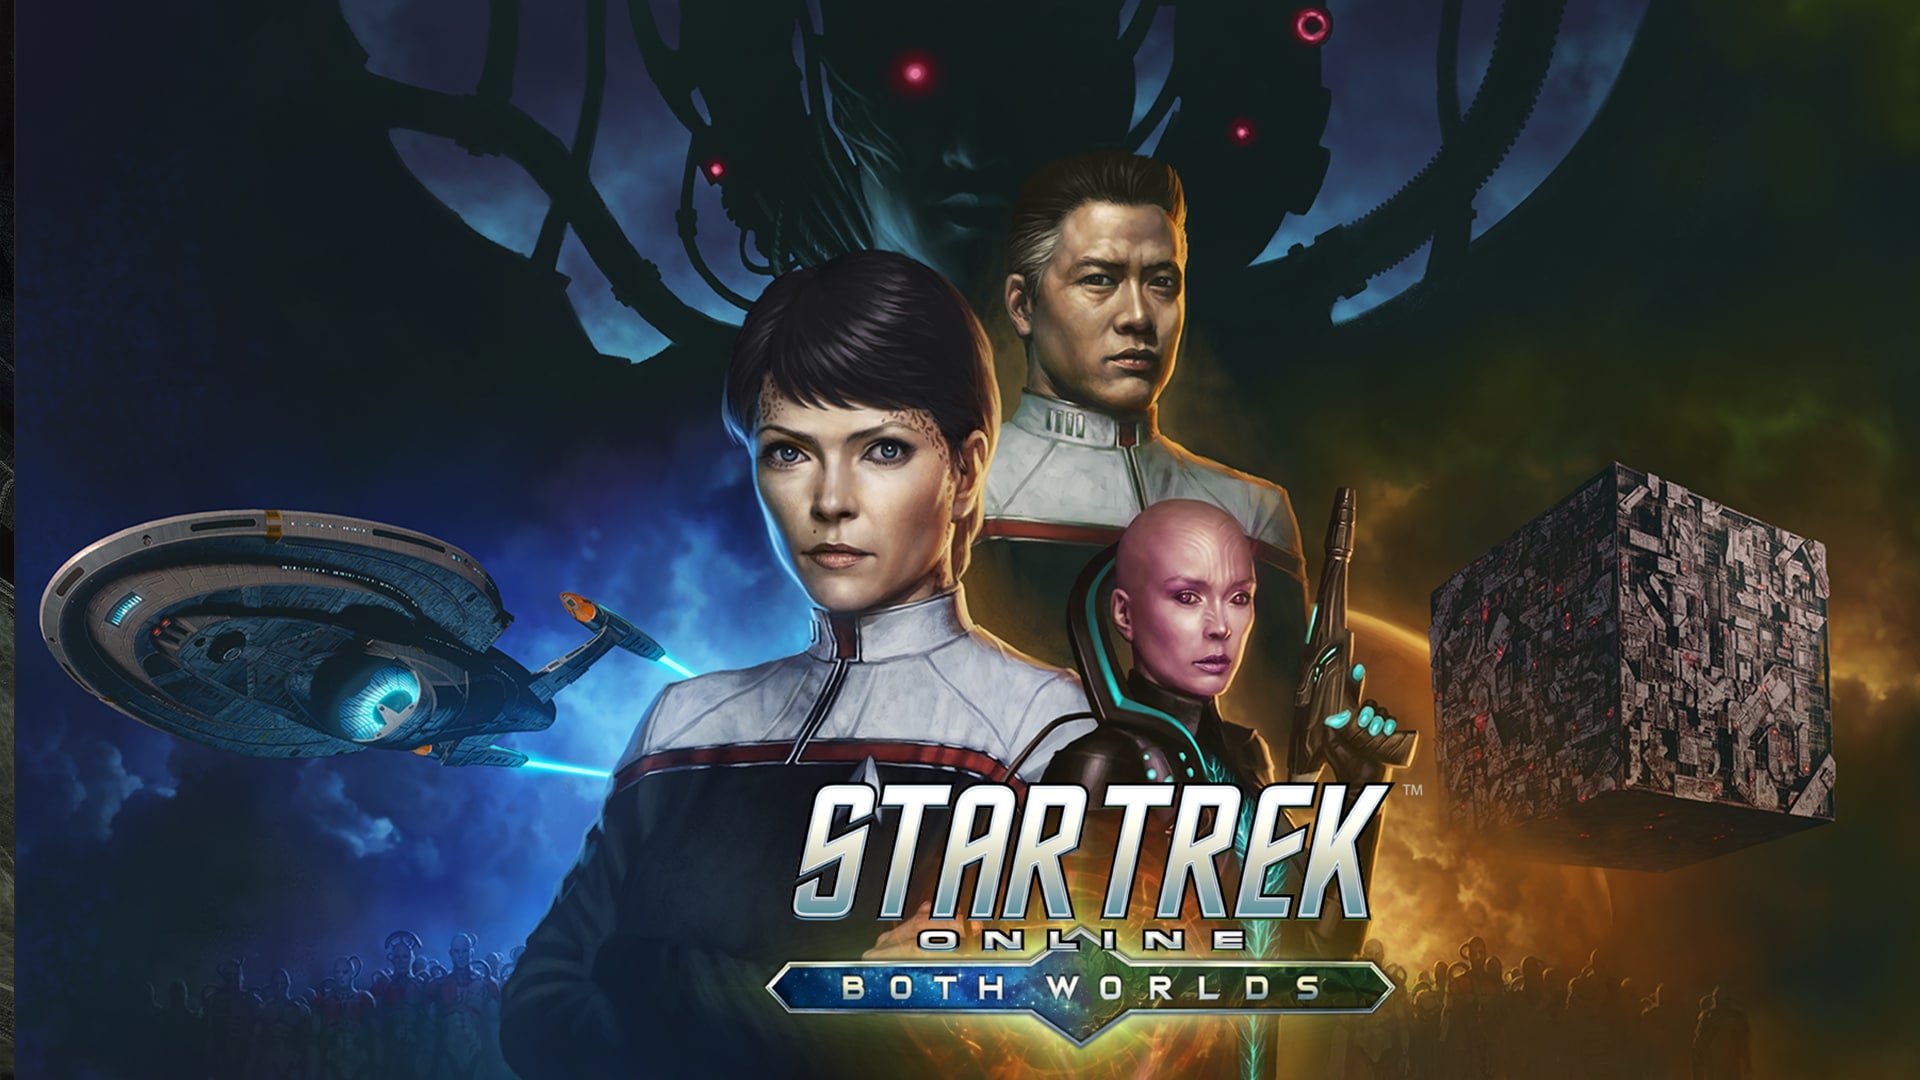 [ONE-PS4] Star Trek Online : Both Worlds, disponible le 12 mars ! Cf587381dcba7277e827998abc18b4a61704835437